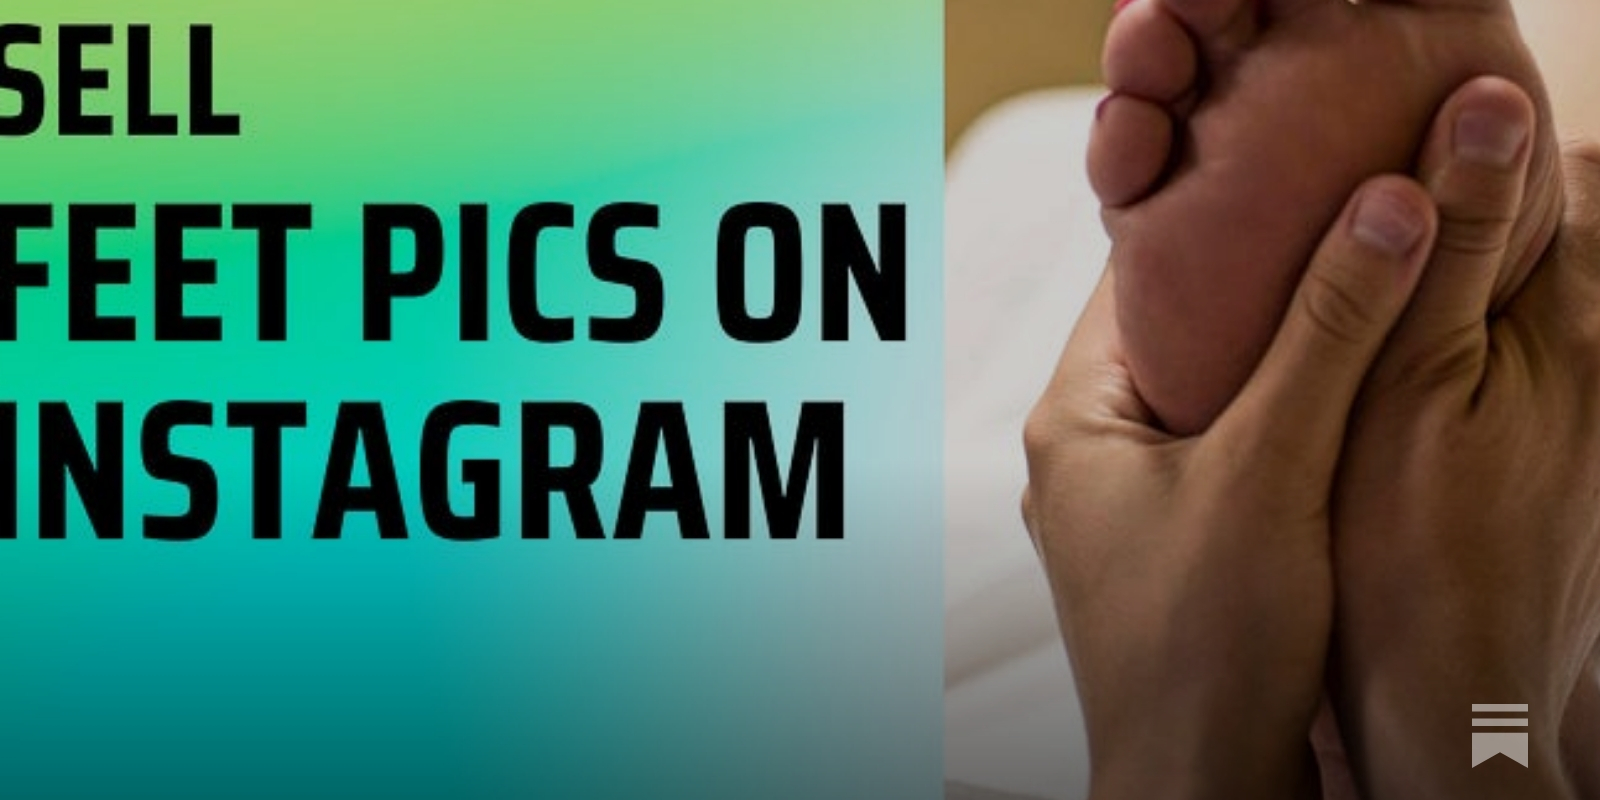 How to sell Feet Pics on Instagram? (Step-by-Step Guide)